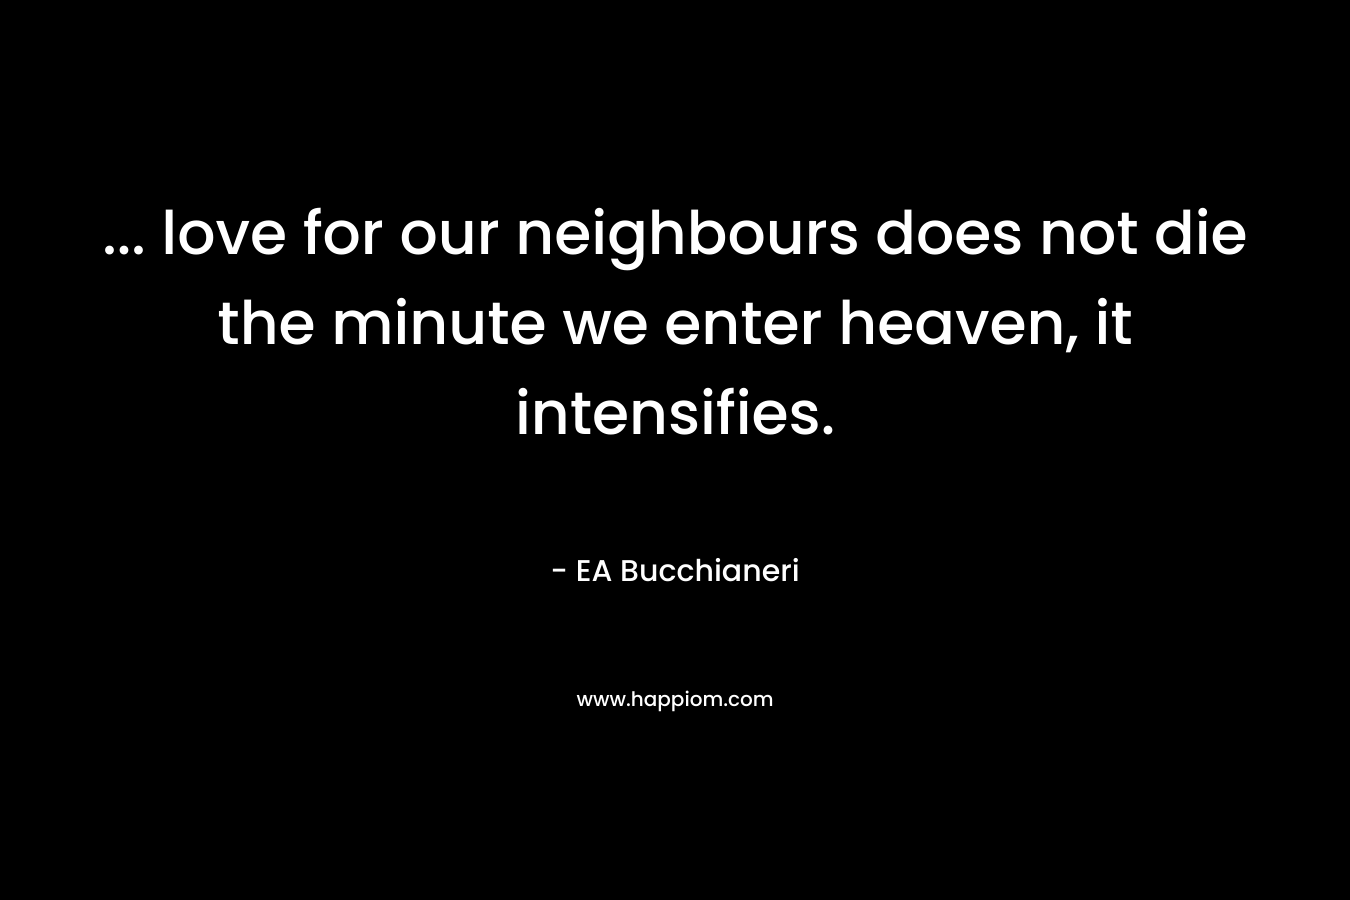 … love for our neighbours does not die the minute we enter heaven, it intensifies. – EA Bucchianeri